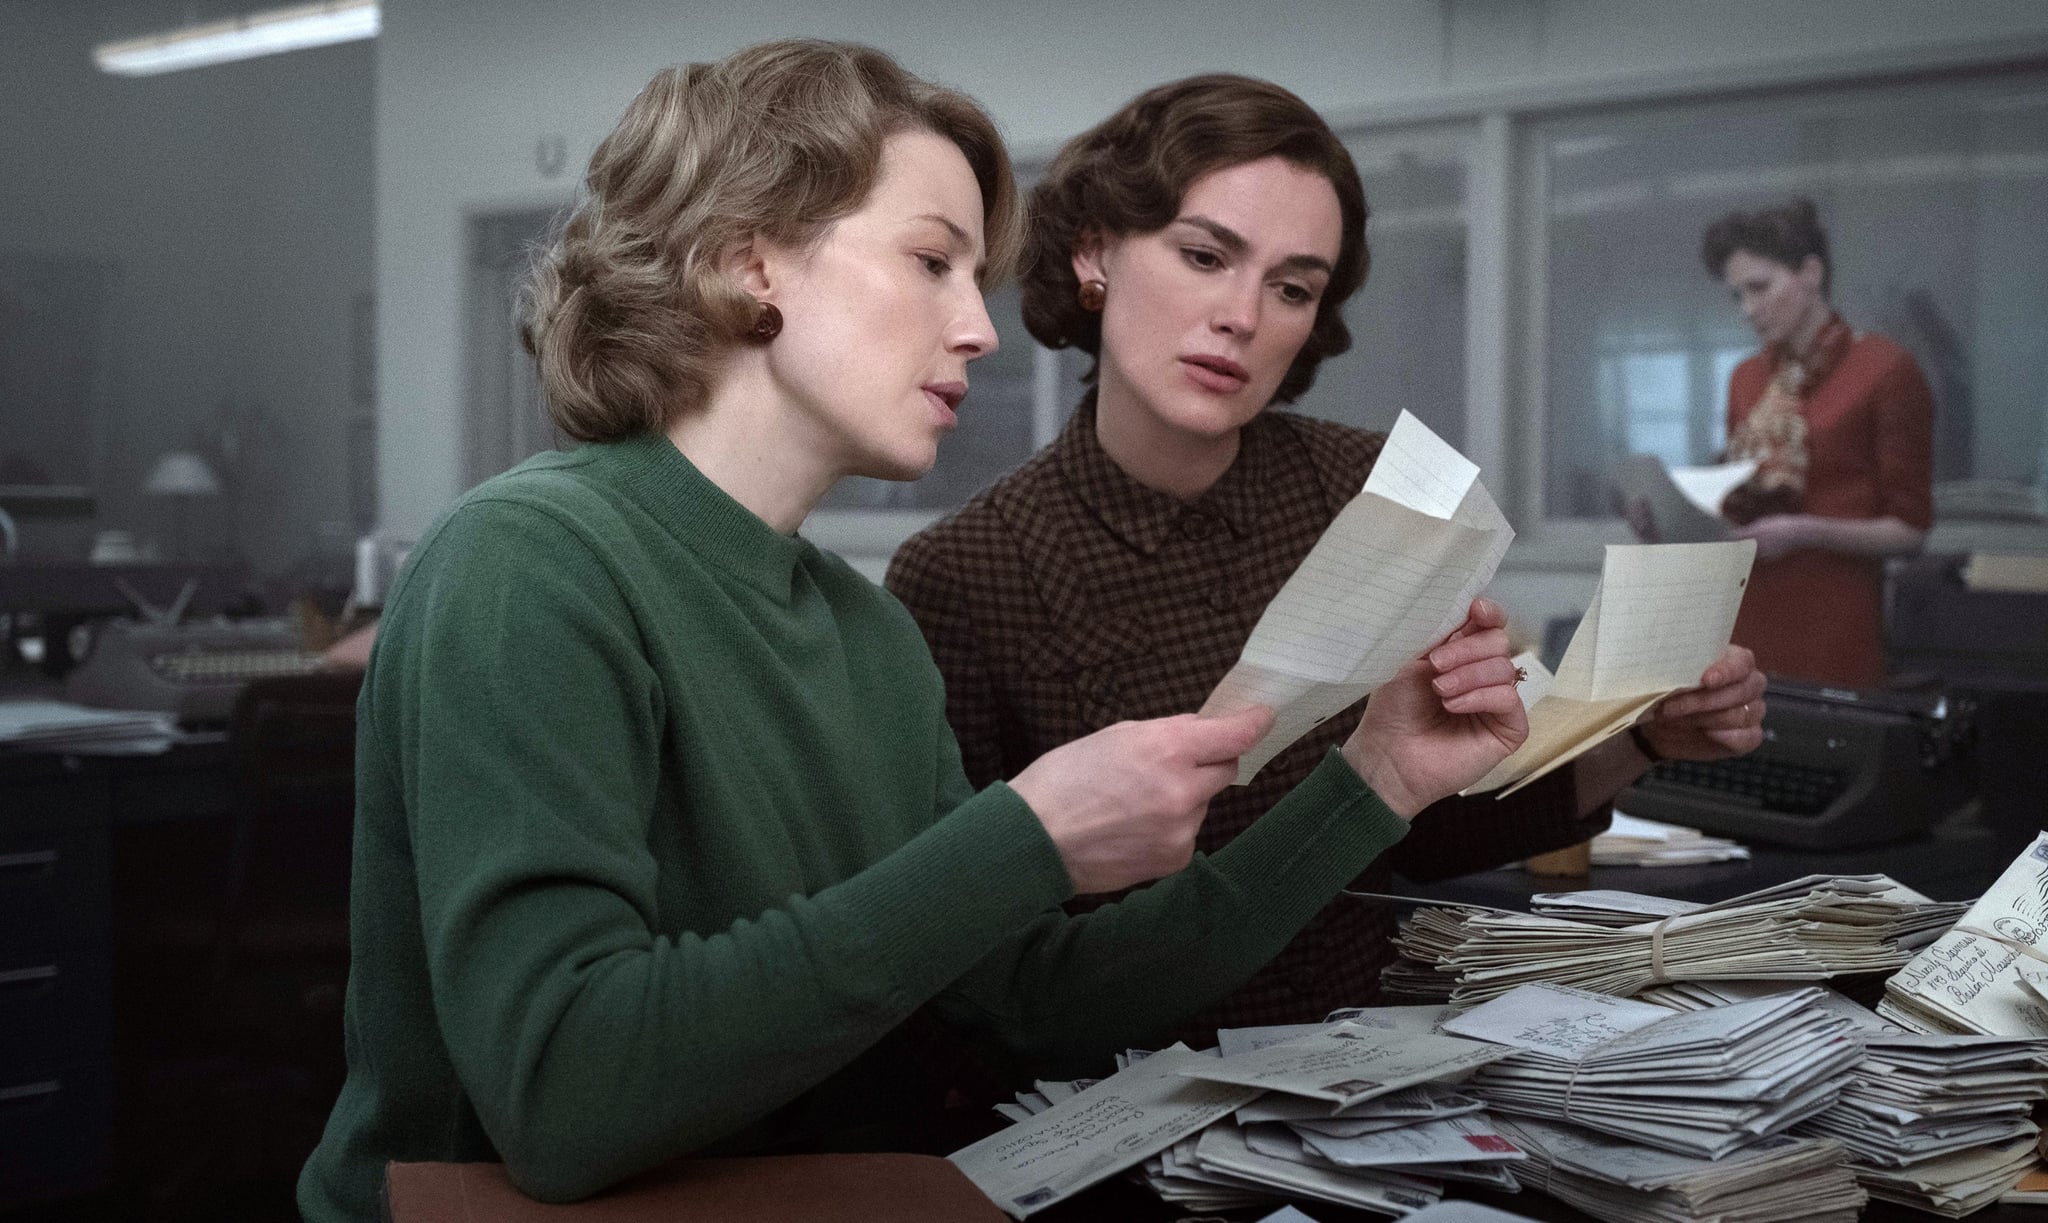 BOSTON STRANGLER, from left: Carrie Coon as Jean Cole, Keira Knightley as Loretta McLaughlin, 2023. ph: Claire Folger /  20th Century Studios /Courtesy Everett Collection